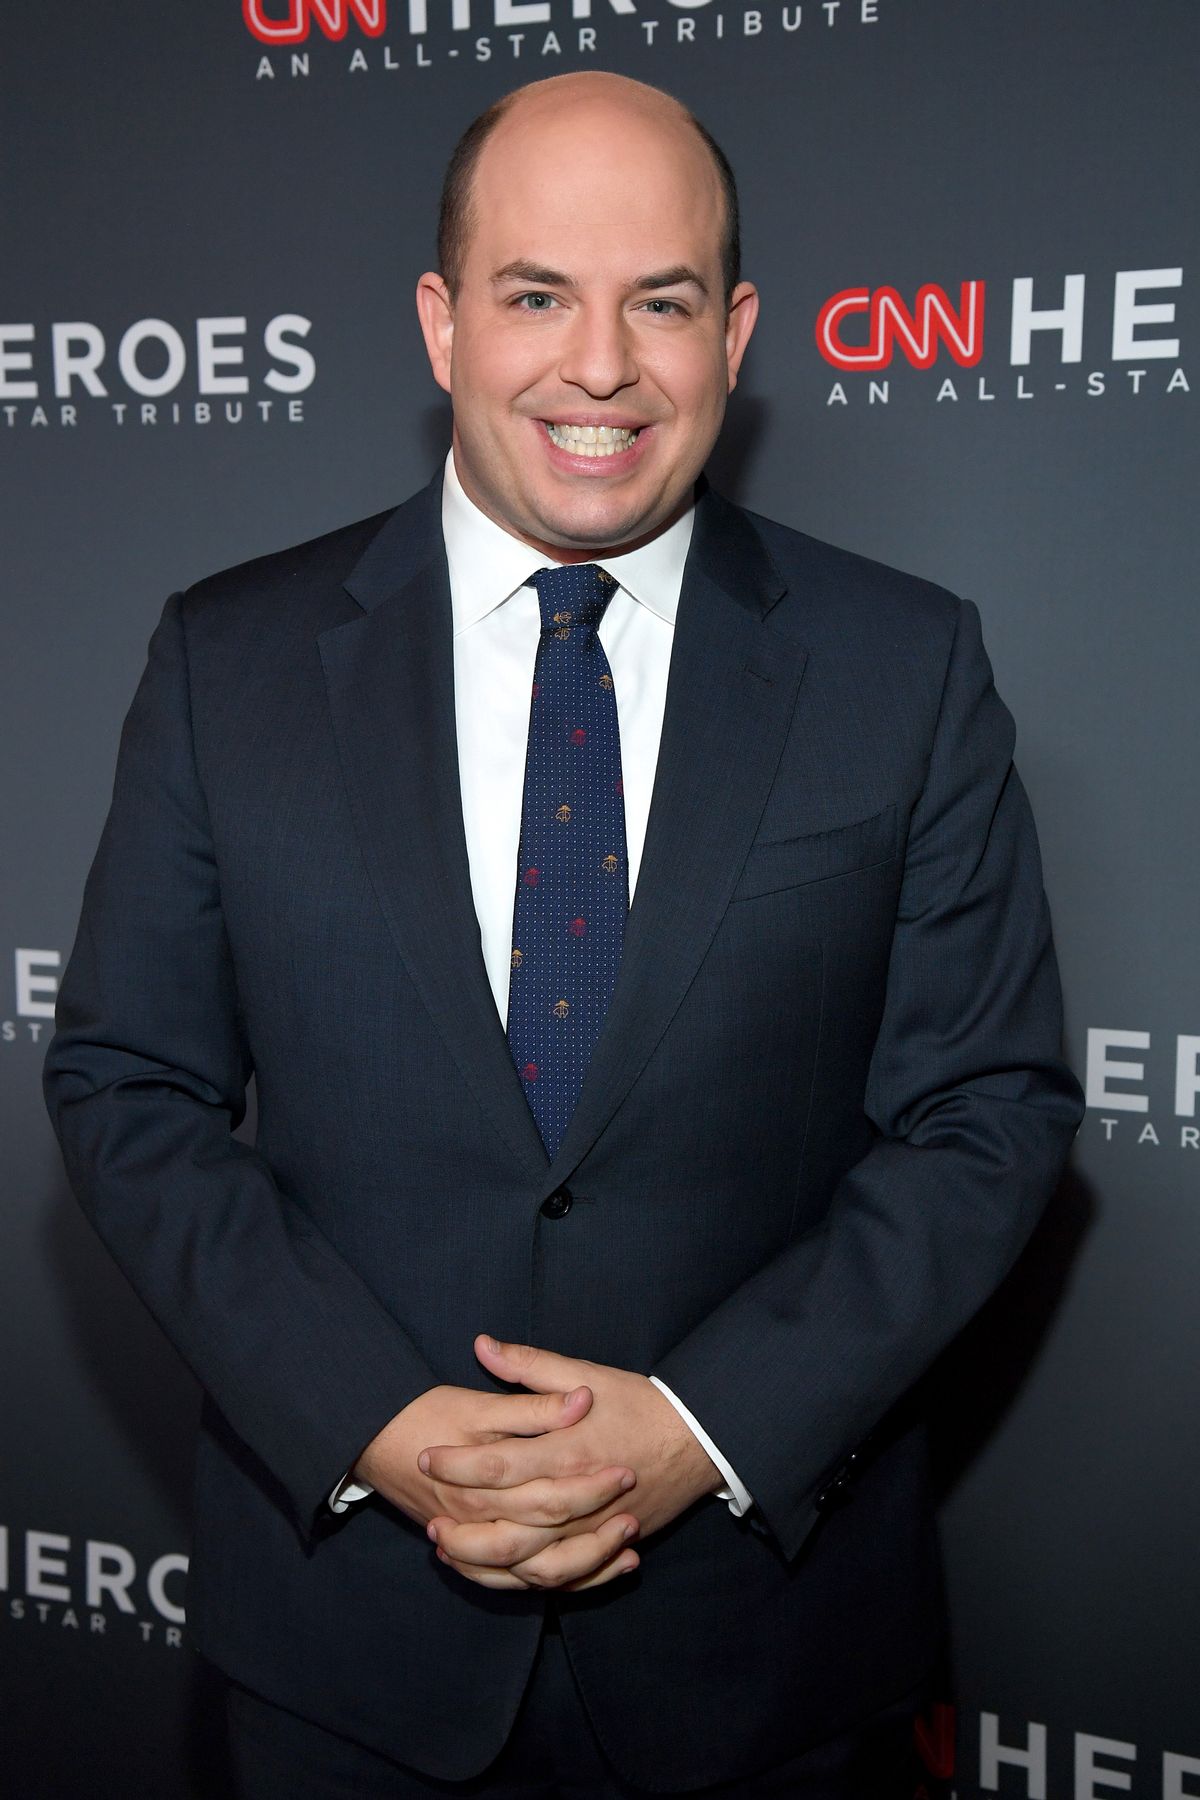 NEW YORK, NEW YORK - DECEMBER 08: Brian Stelter attends CNN Heroes at the American Museum of Natural History on December 08, 2019 in New York City. (Photo by Kevin Mazur/Getty Images for WarnerMedia) (Kevin Mazur/Getty Images for WarnerMedia)